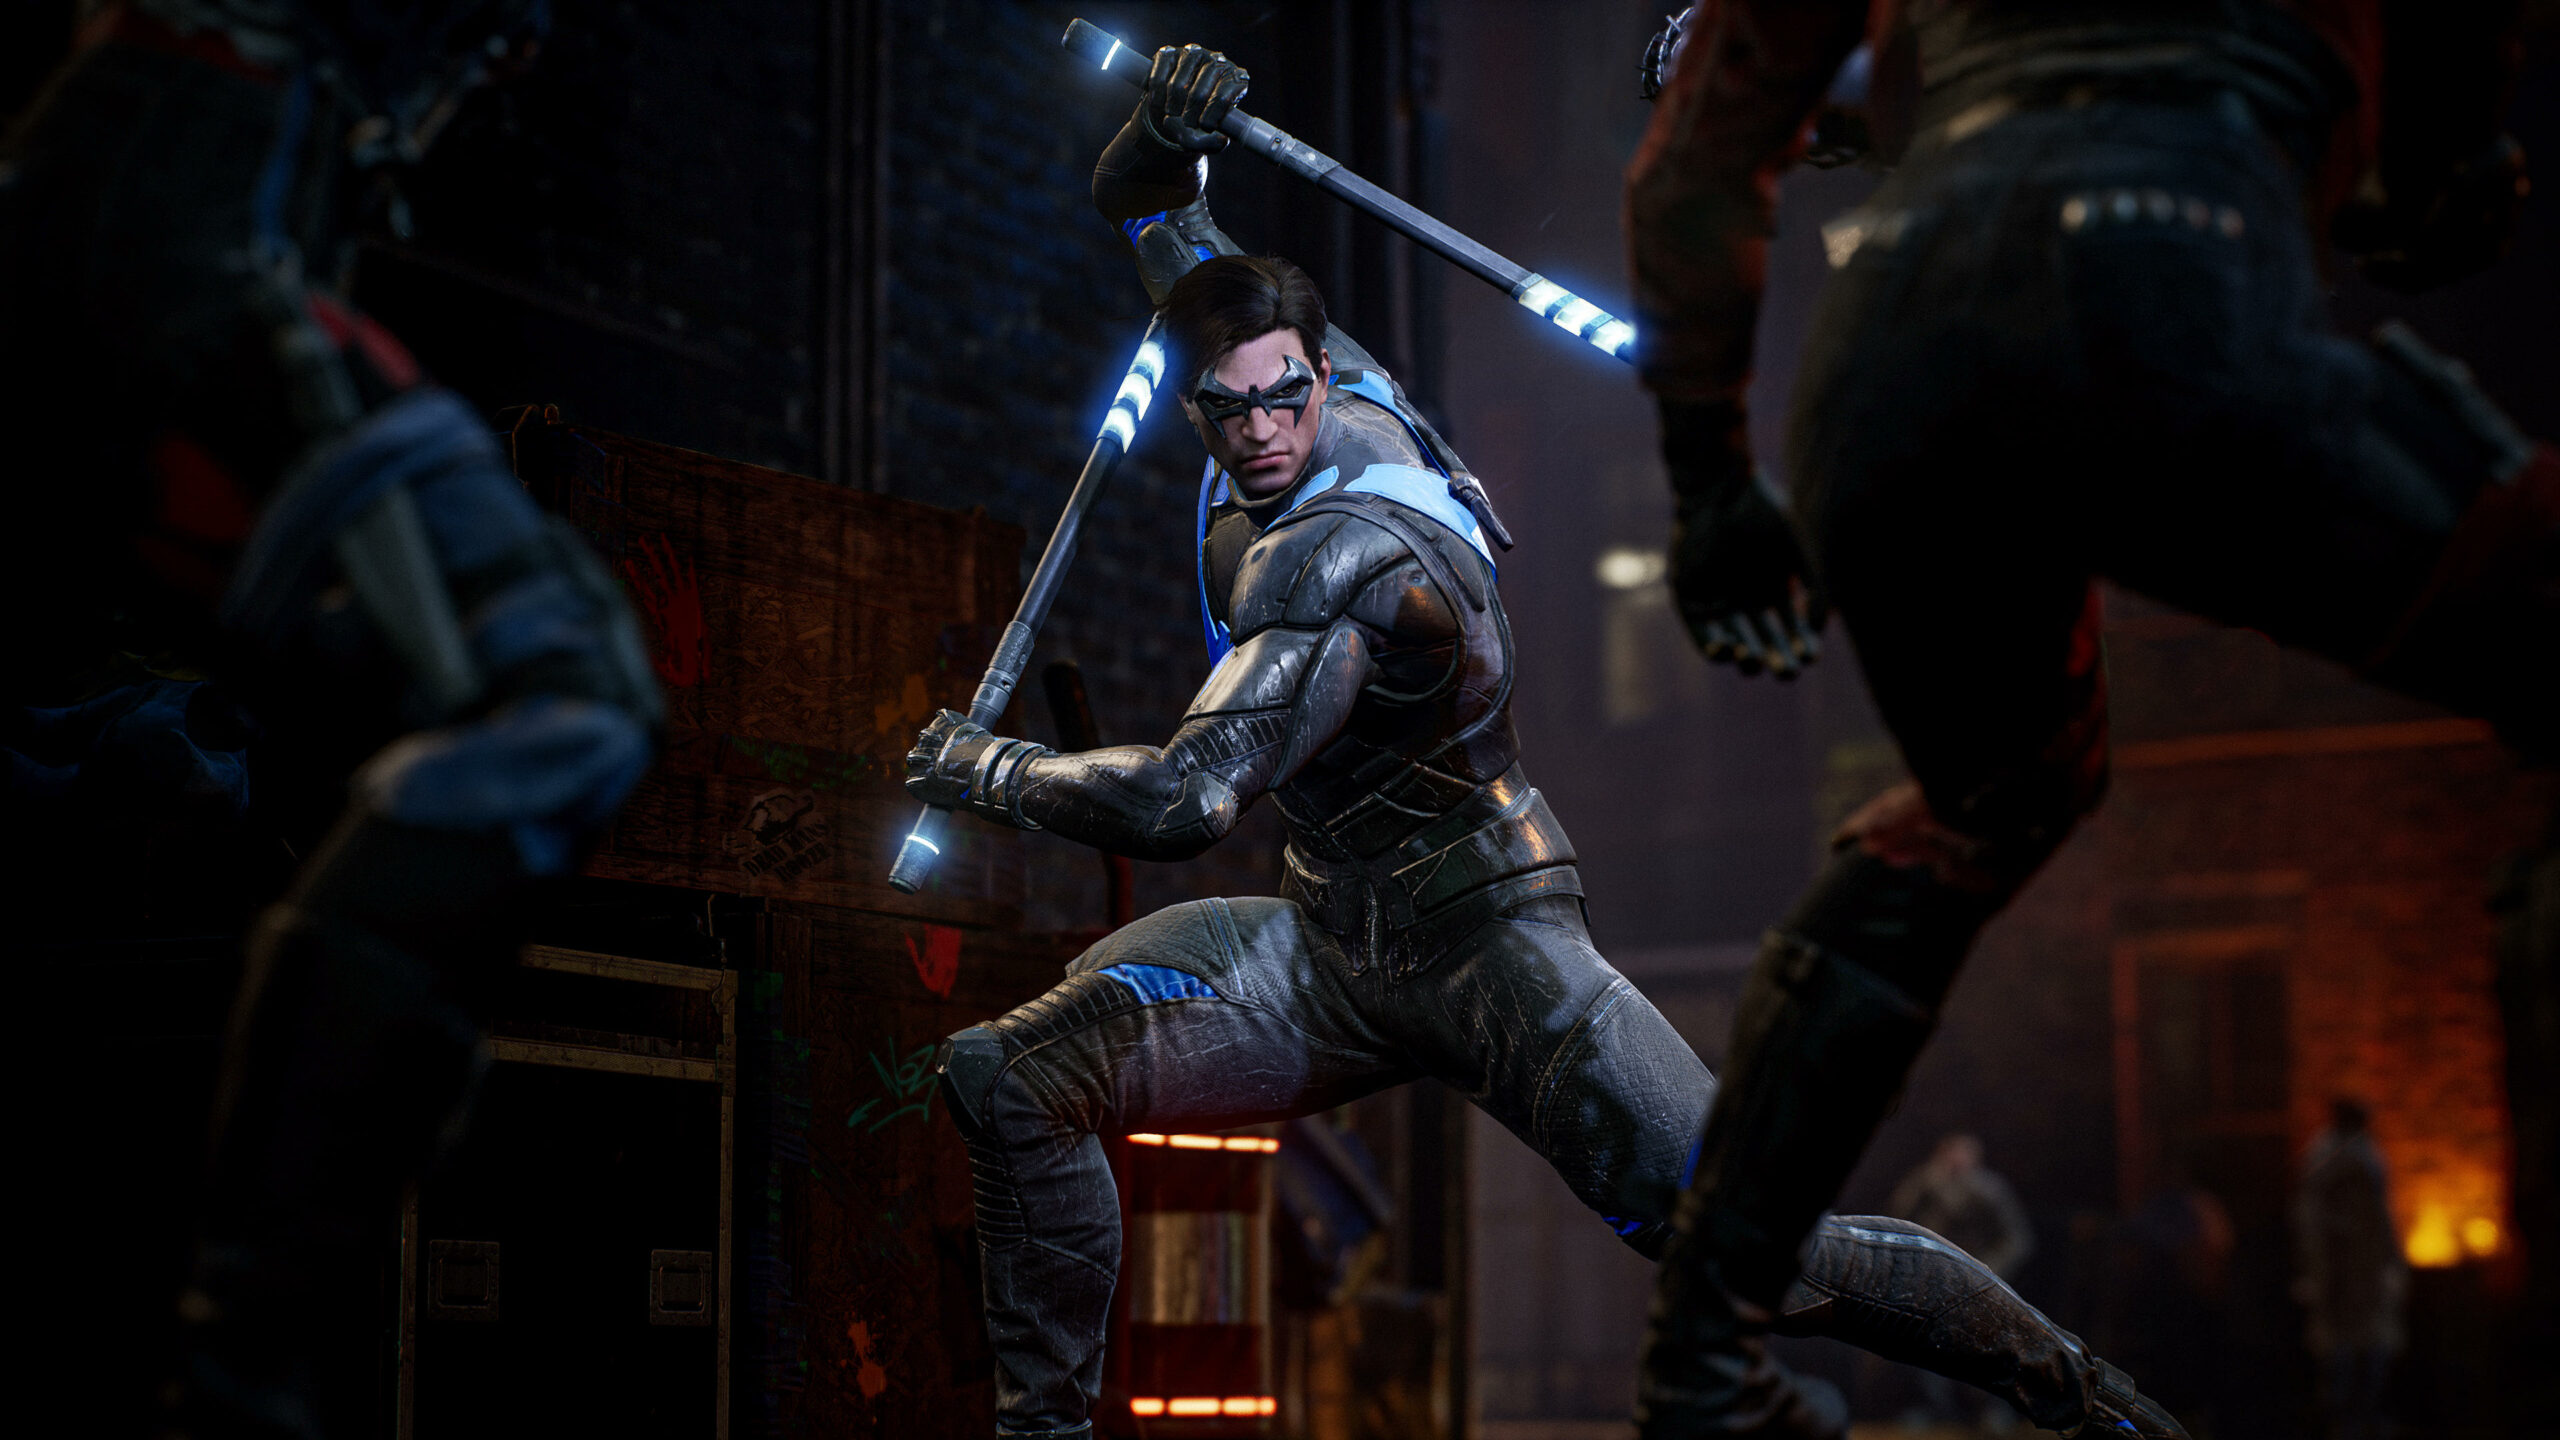 Gotham Knights Gameplay Shown; PS4, Xbox One Versions Cancelled - RPGamer